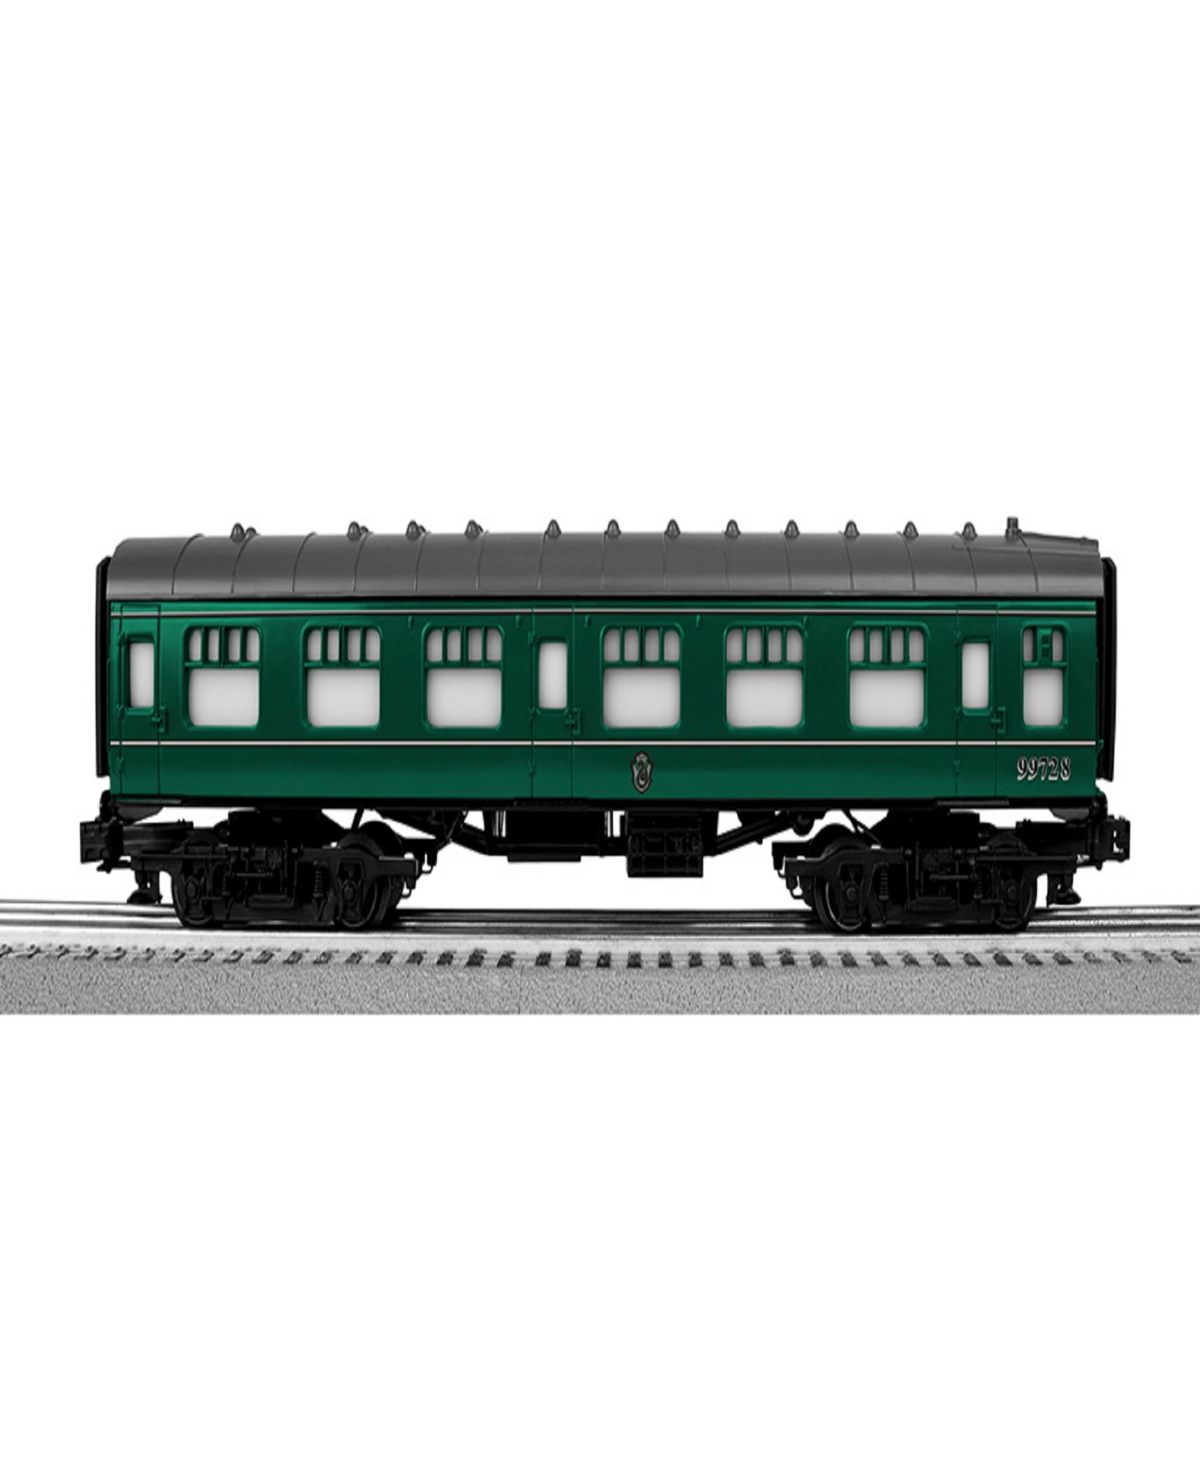 Lionel Babies' Hogwarts Slytherin House Coach Car In Multi